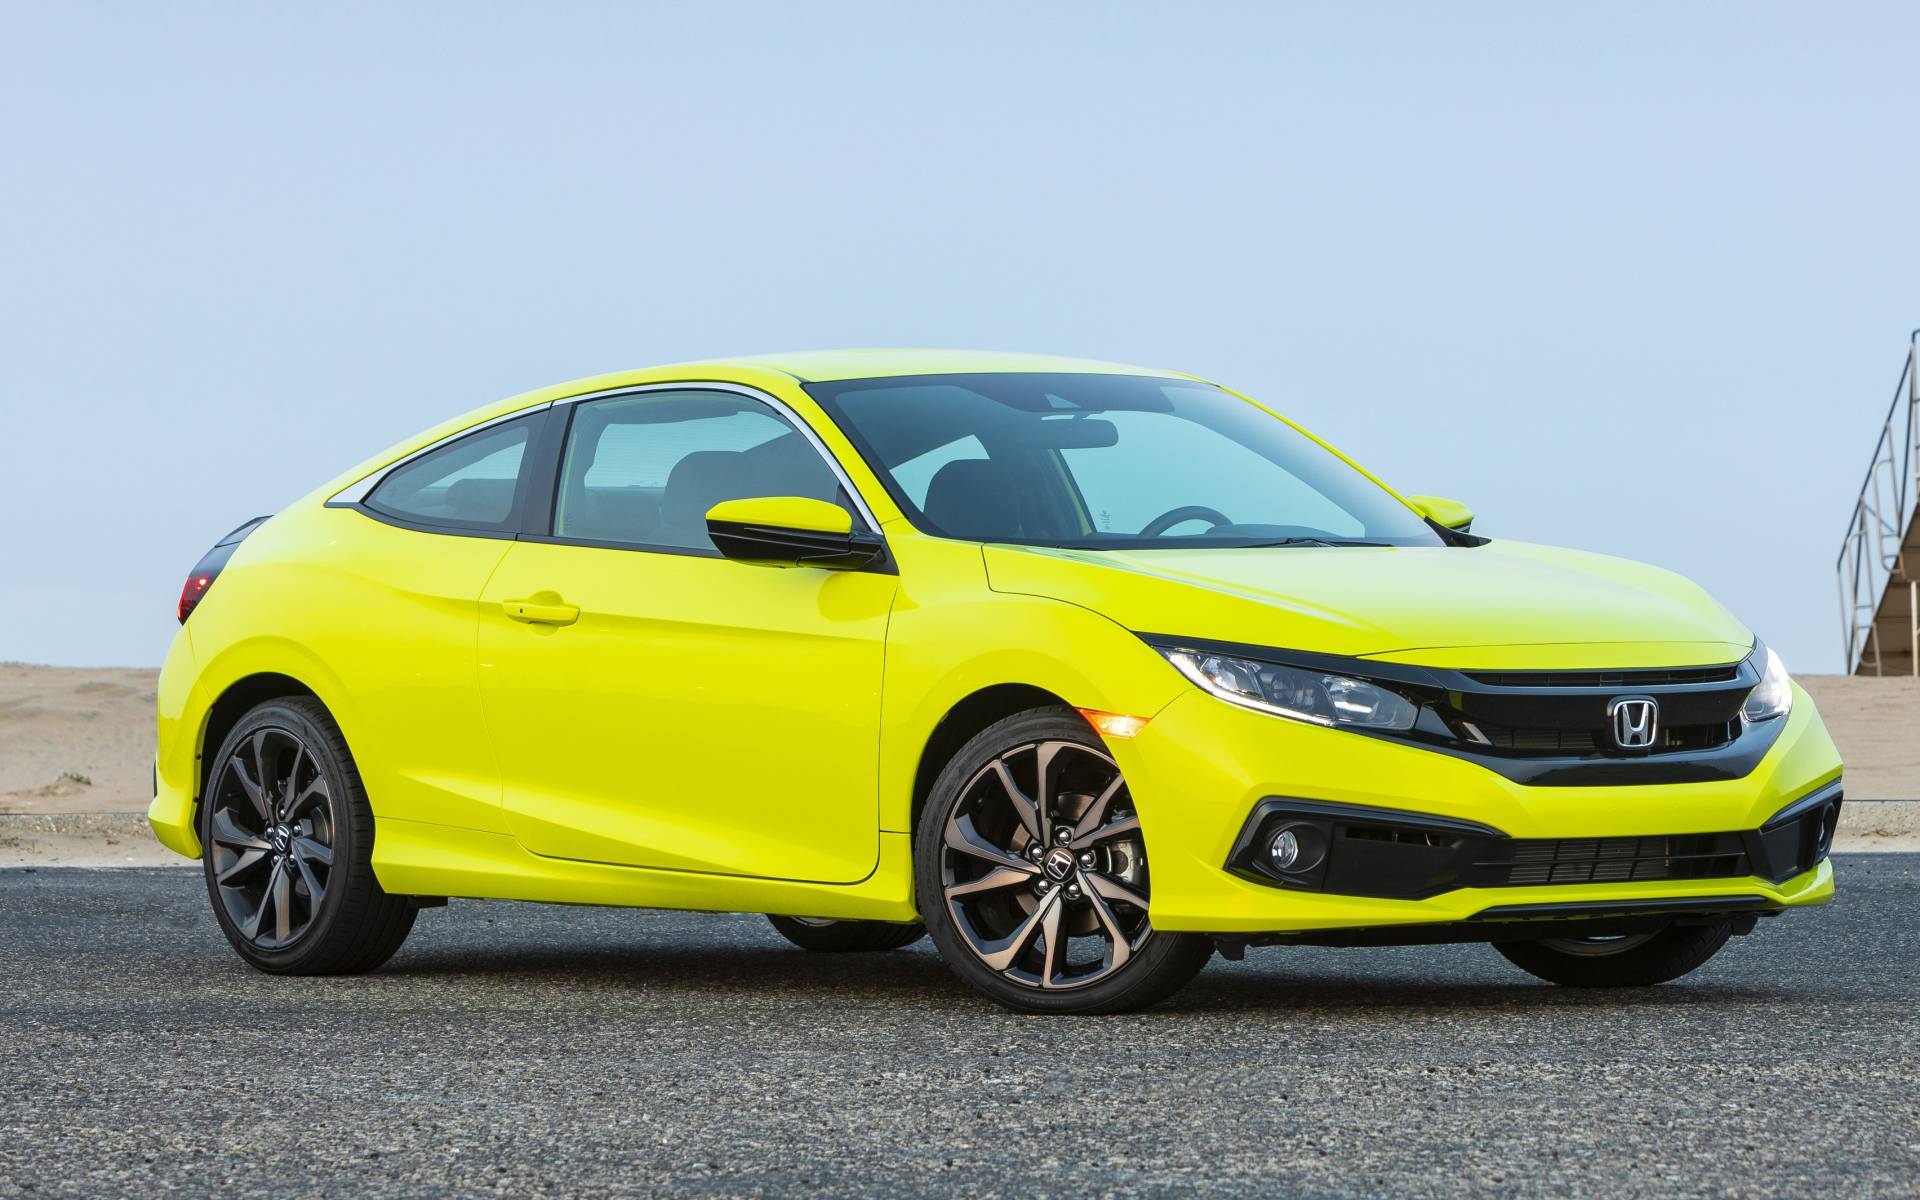 2020 Honda Civic Touring Sedan Specifications The Car Guide